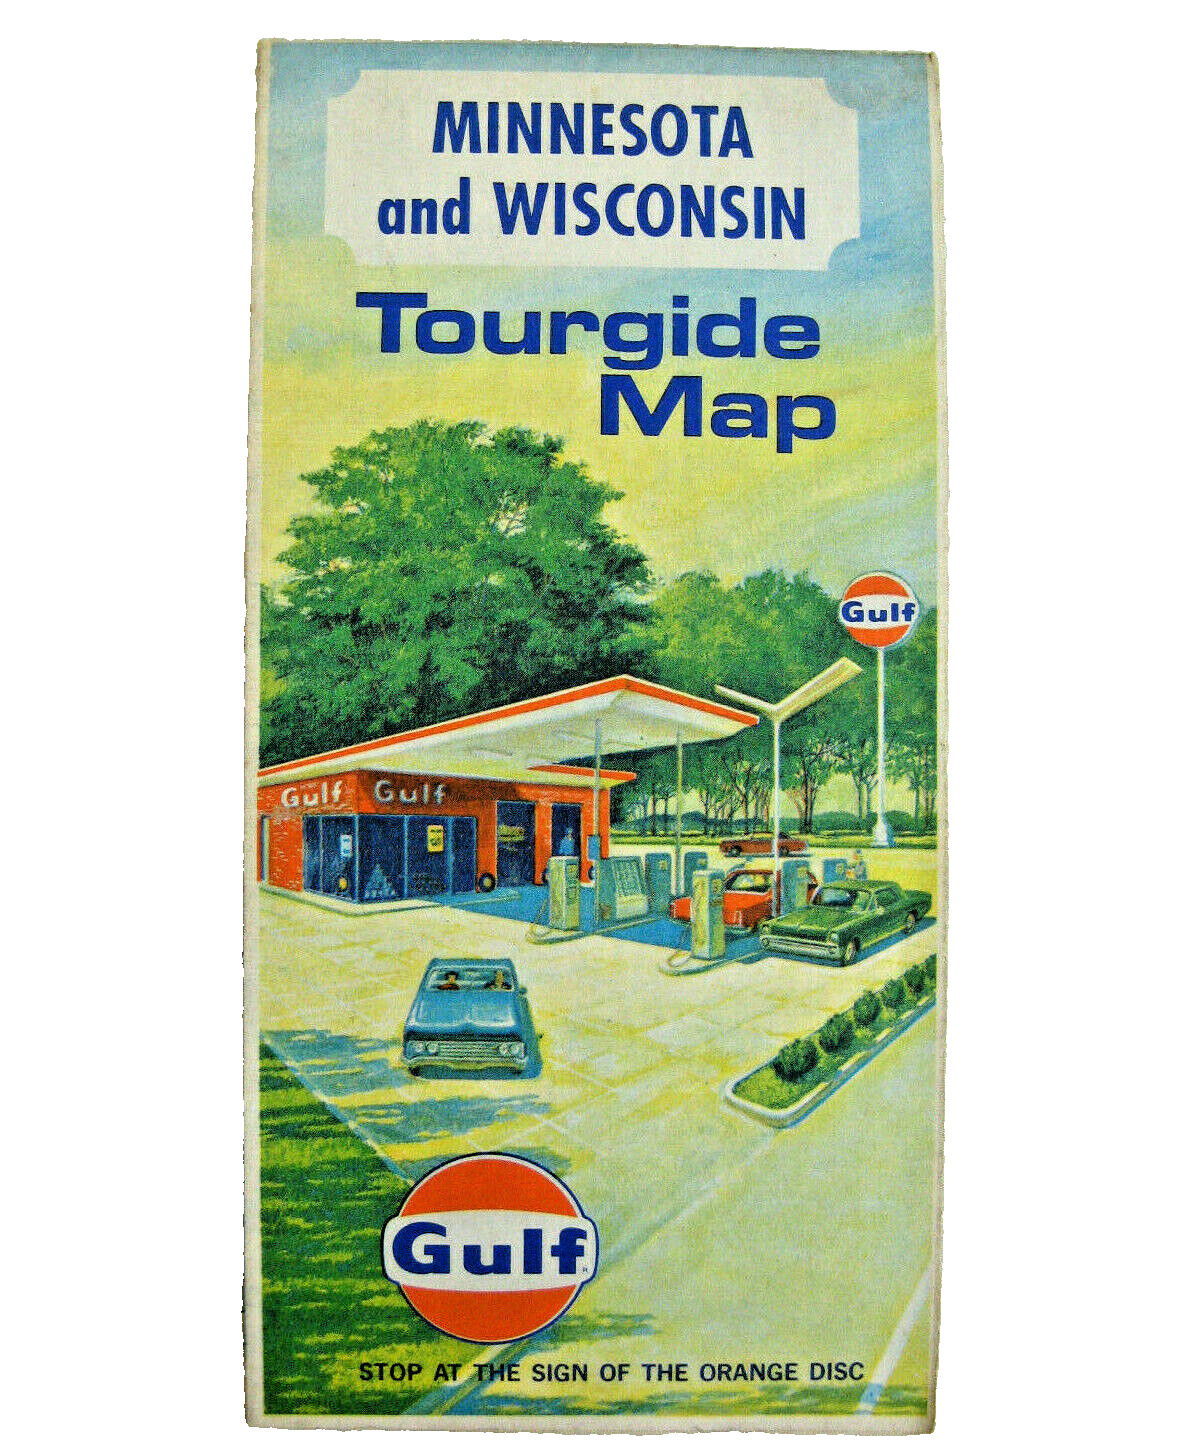 1968 Vintage Minnesota and Wisconsin Tourgide Map by Gulf Oil